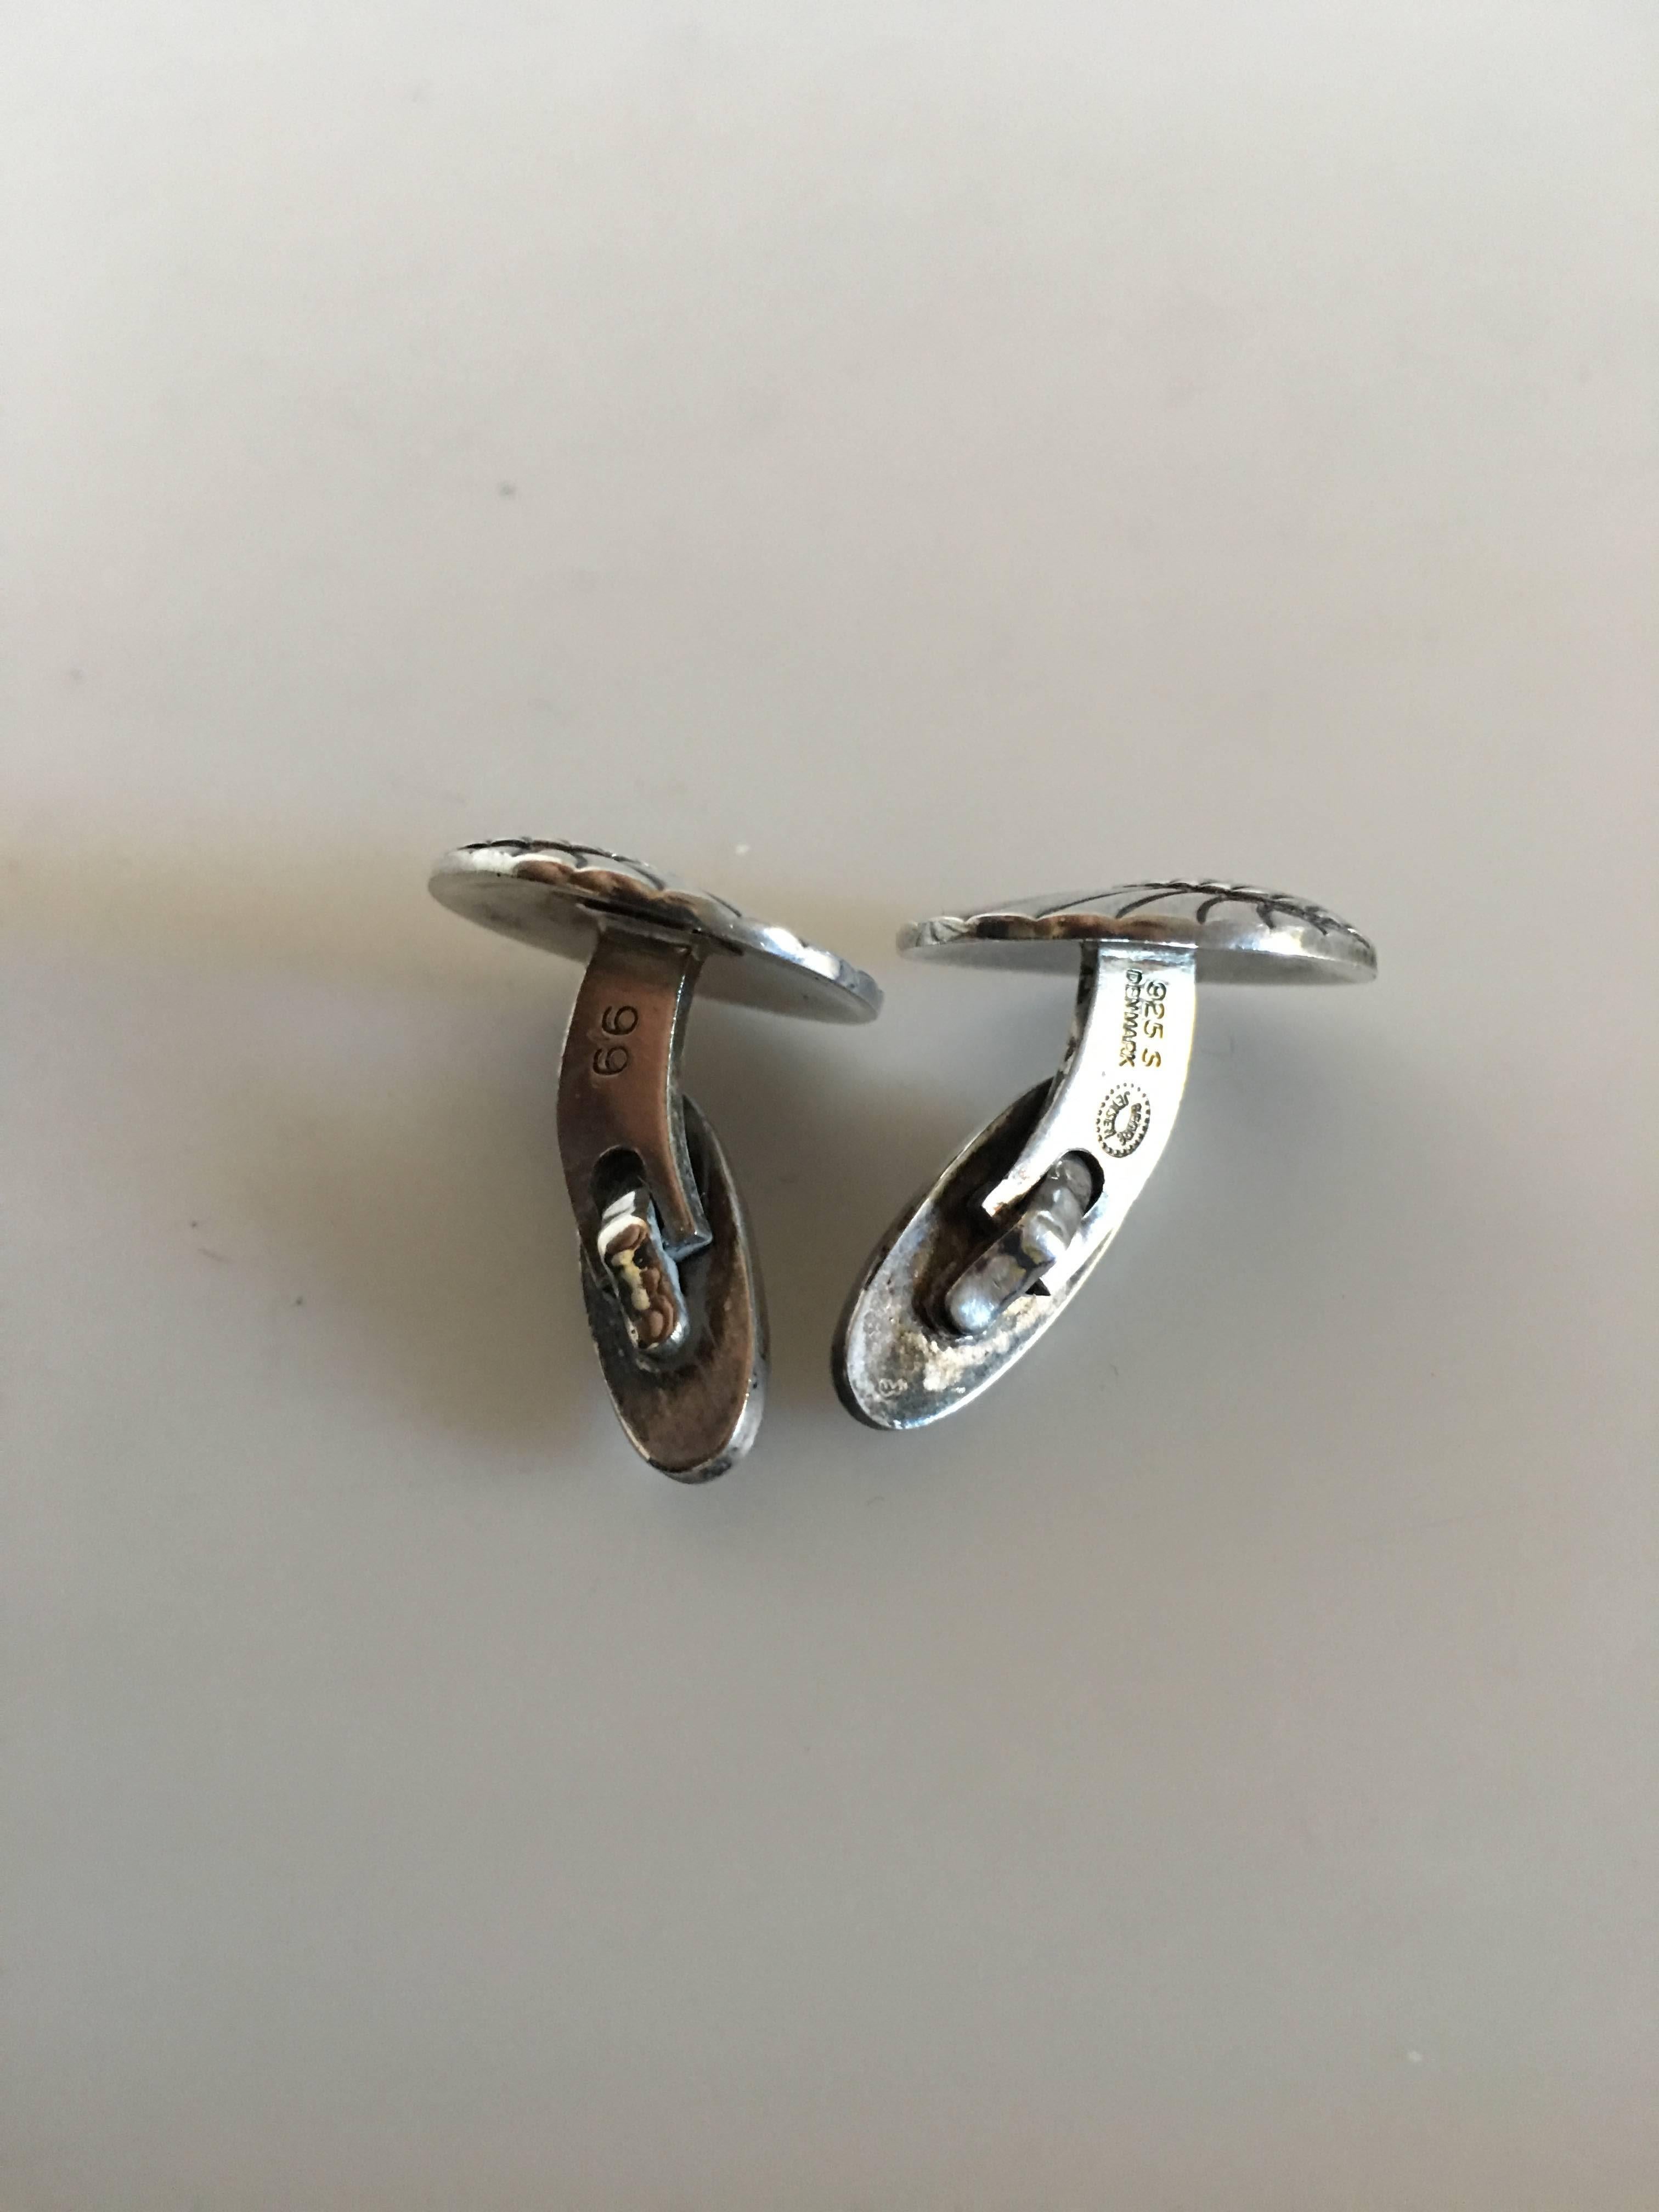 Georg Jensen Sterling Silver Cufflinks No. 66. 2 cm diameter. Combined weight of 13 grams. From after 1945.